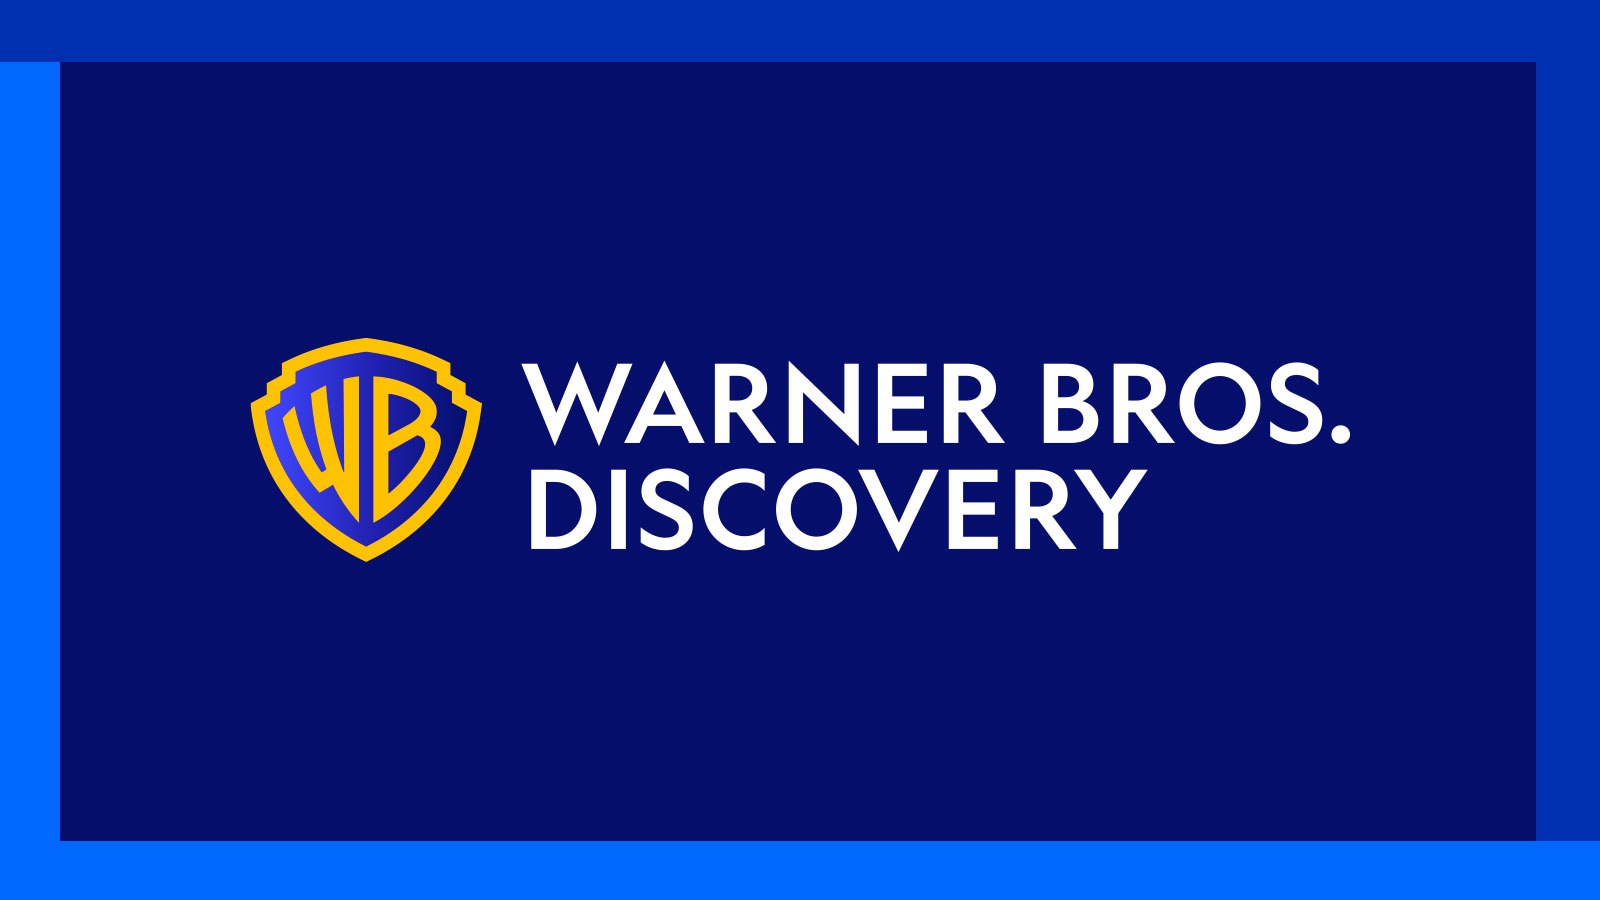 Nasce Warner Bros. Discovery, leader globale nell’intrattenimento e nello streaming